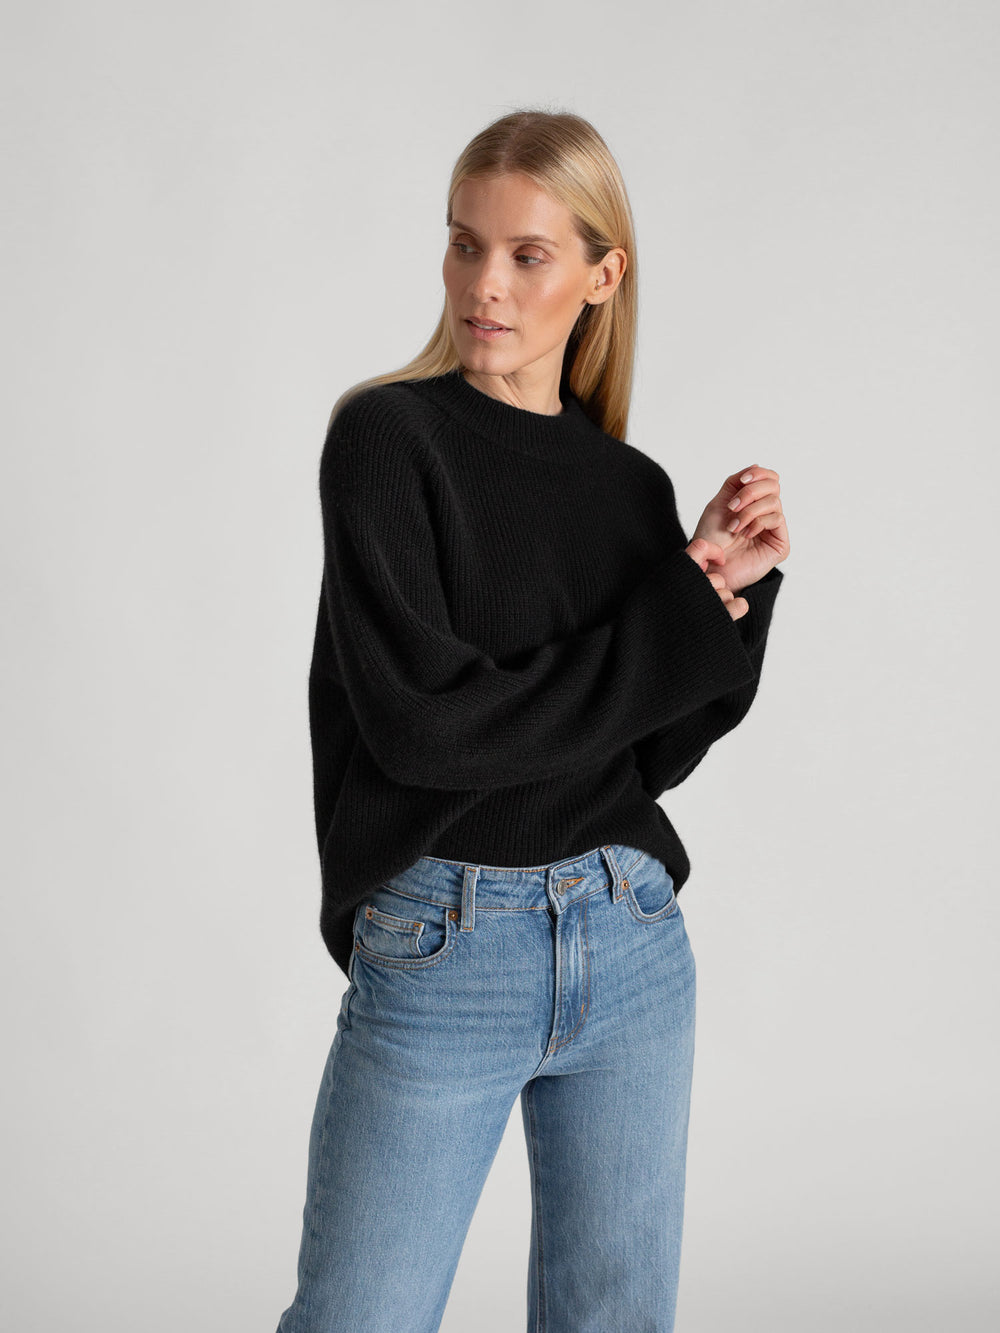 Rib knitted cashmere sweater "Idun" in 100% pure cashmere. Scandinavian design by Kashmina. Color: Black.